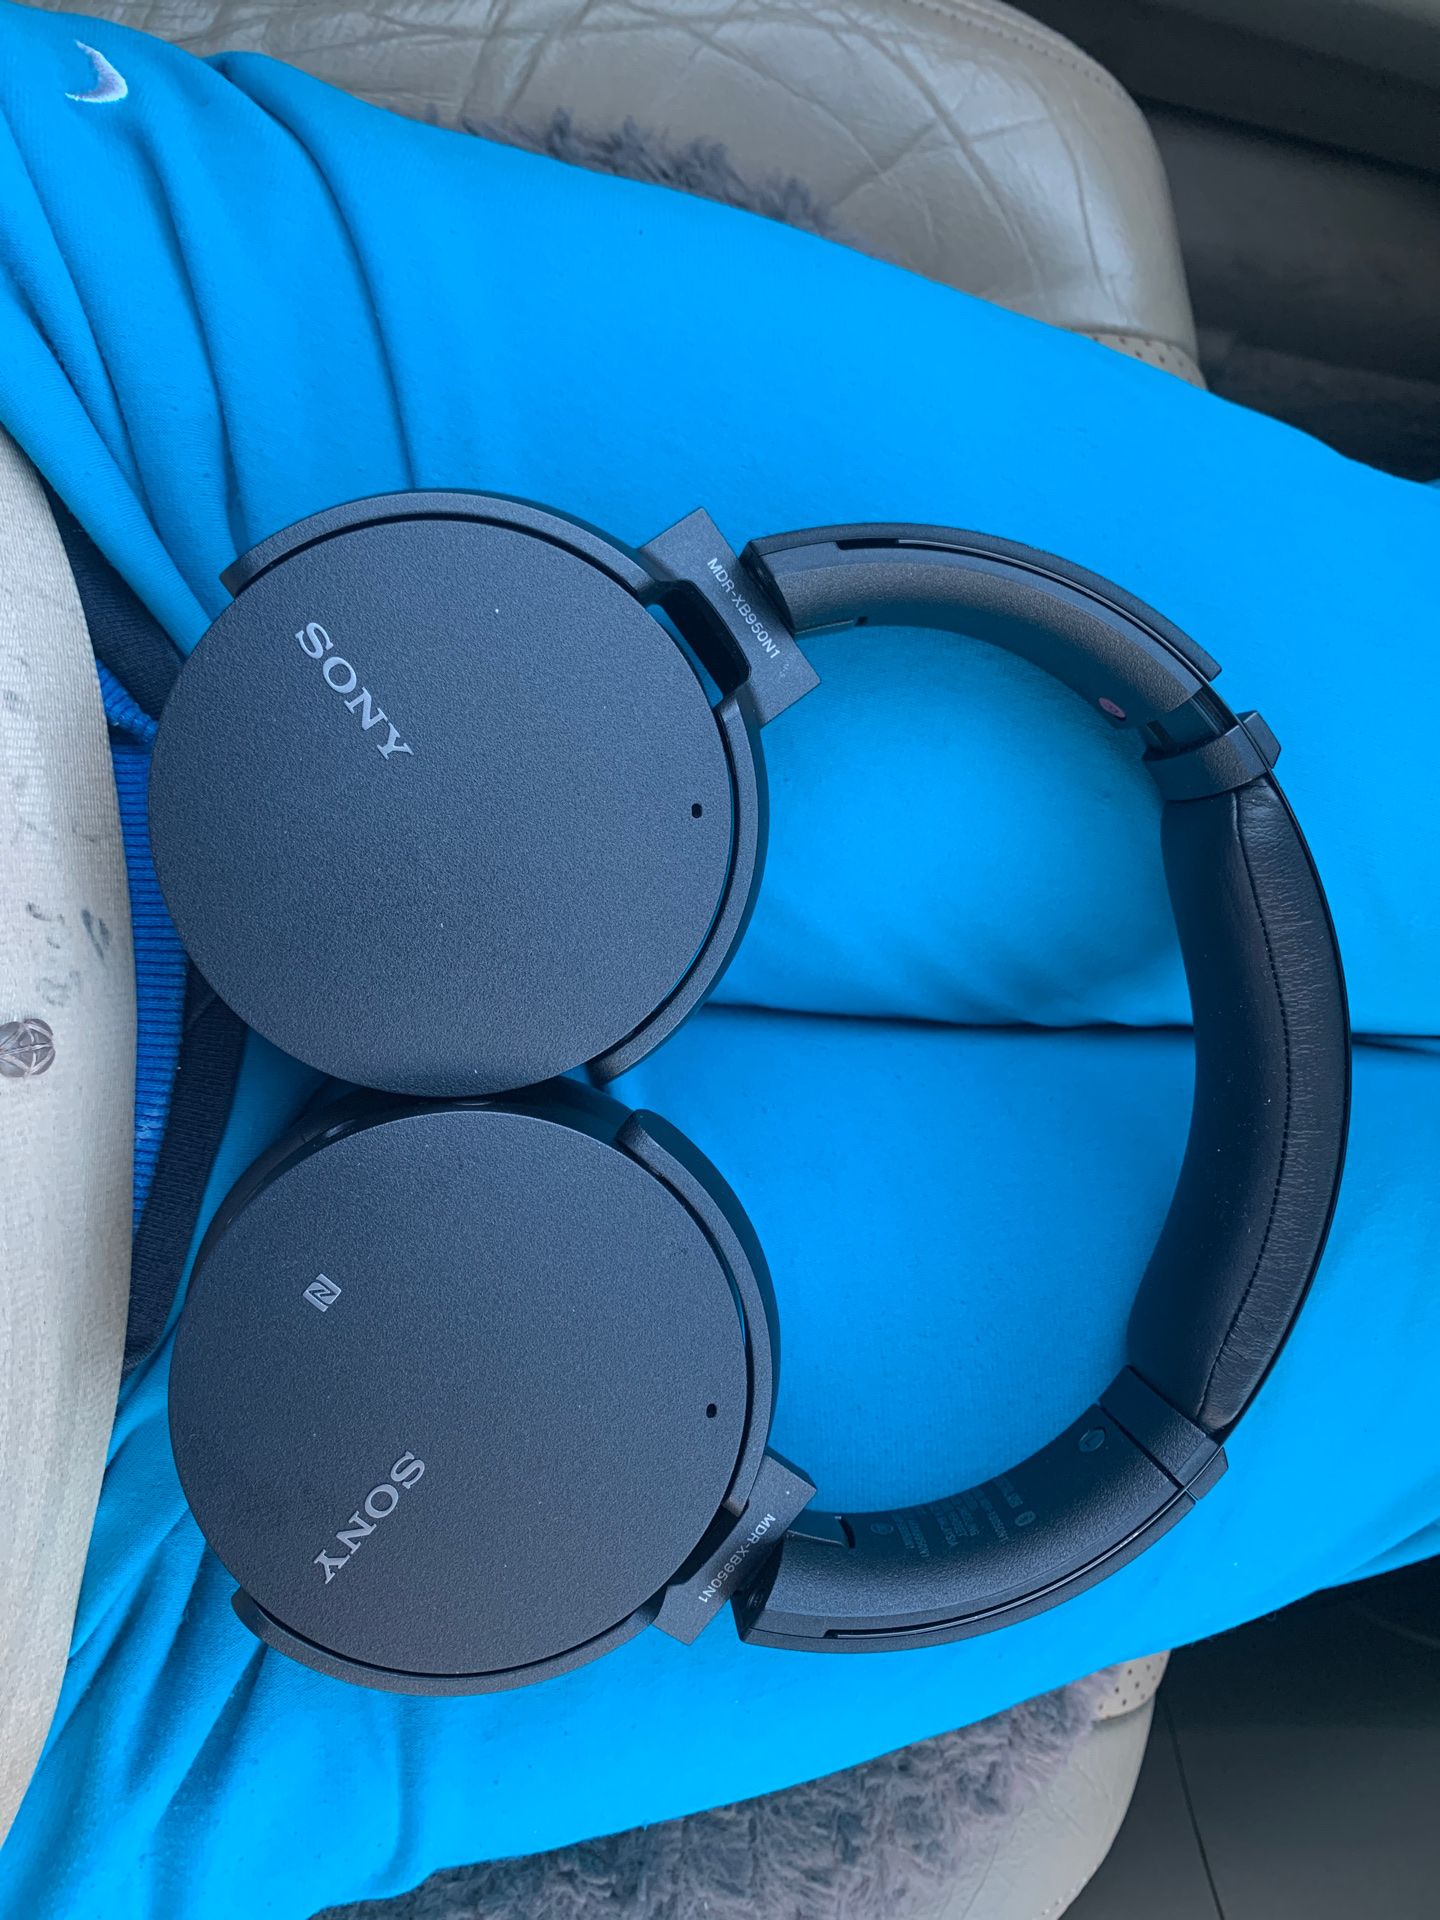 Sony wireless noise cancelling